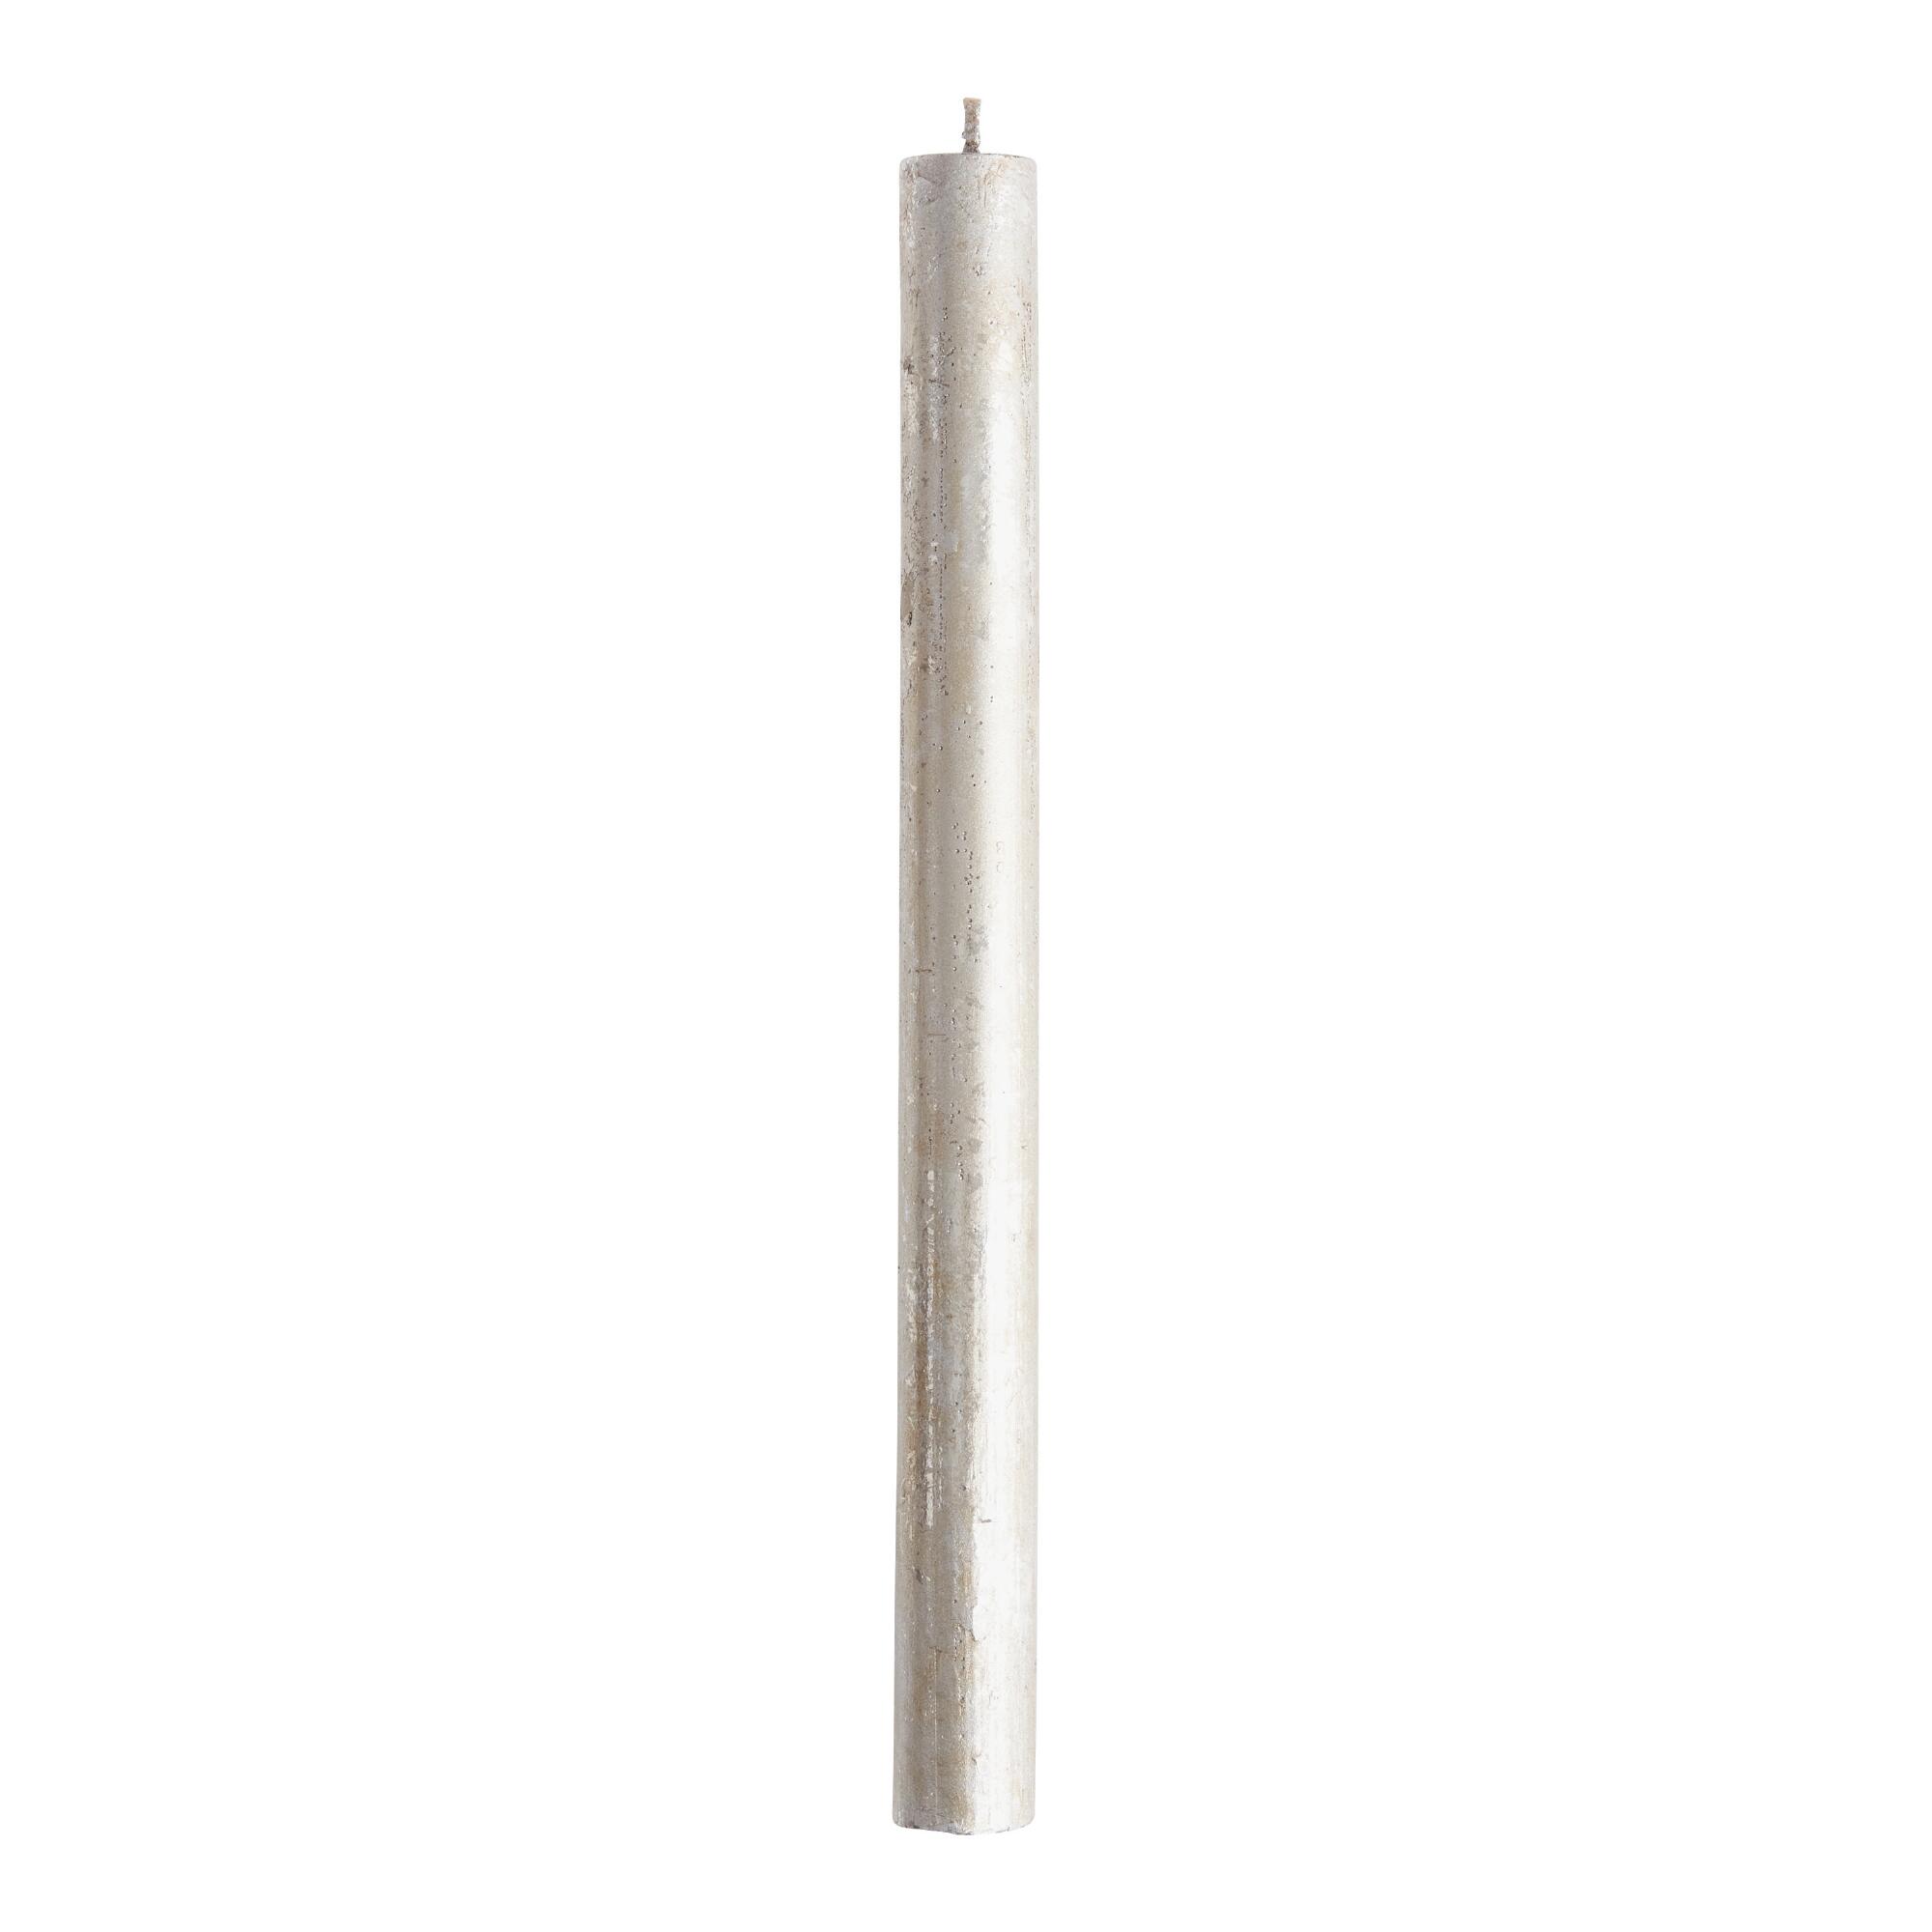 Silver And Gold Mercury Taper Candles 2 Pack by World Market